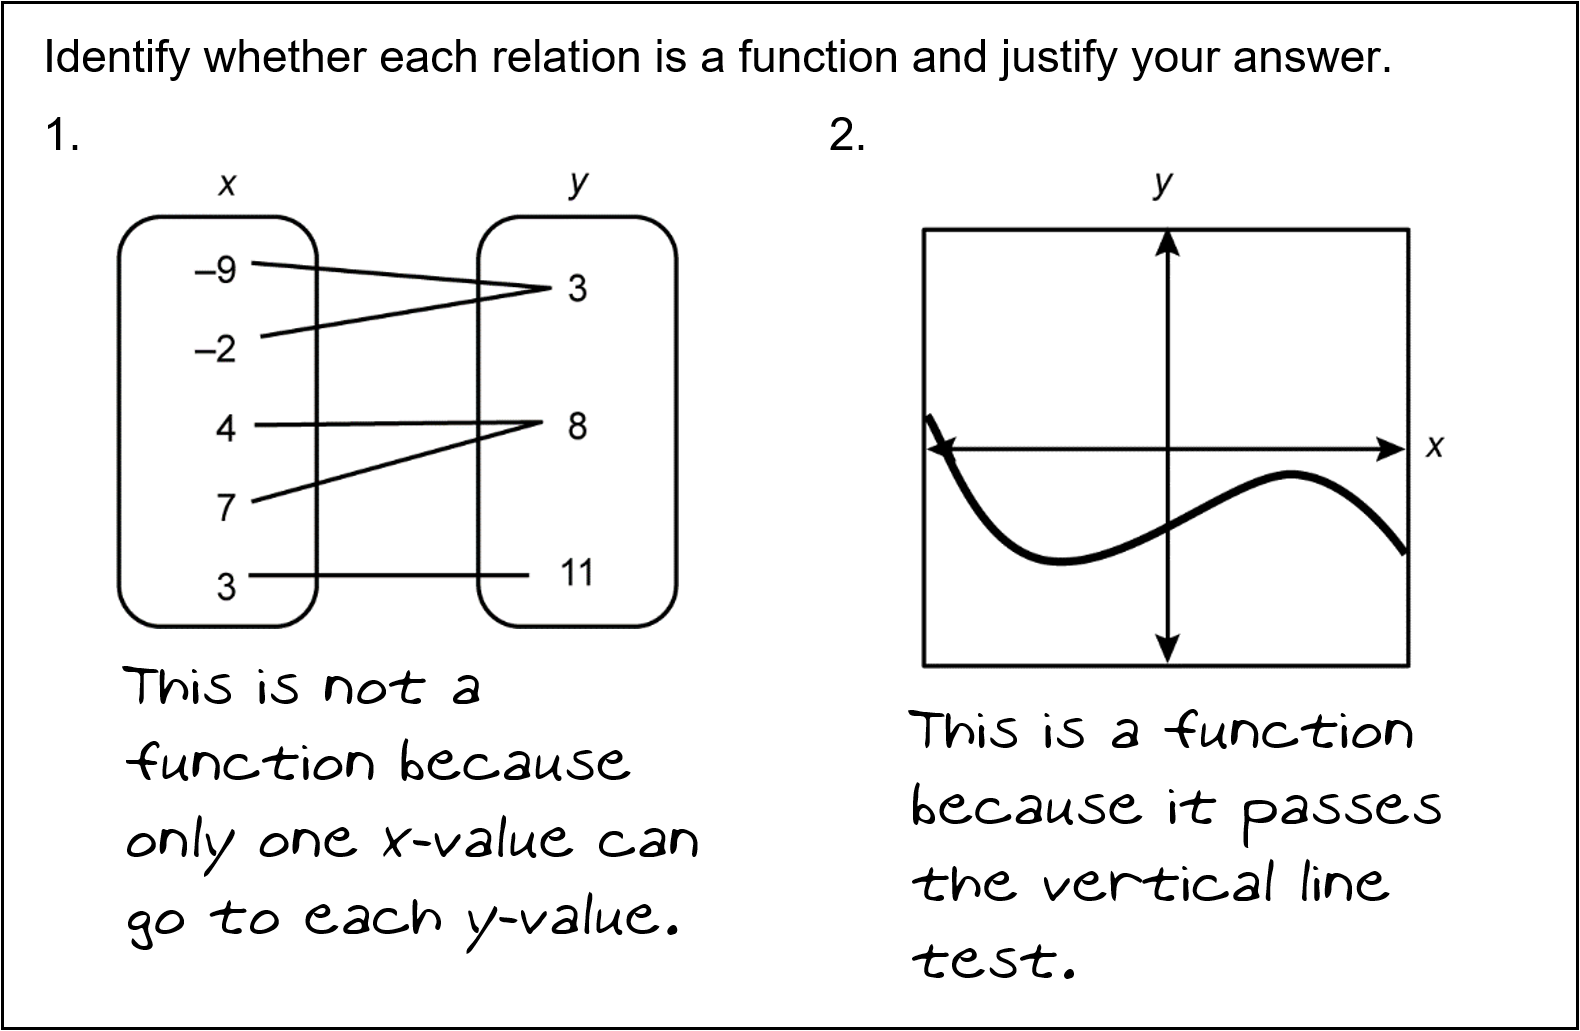 an exit slip on the definition of a function